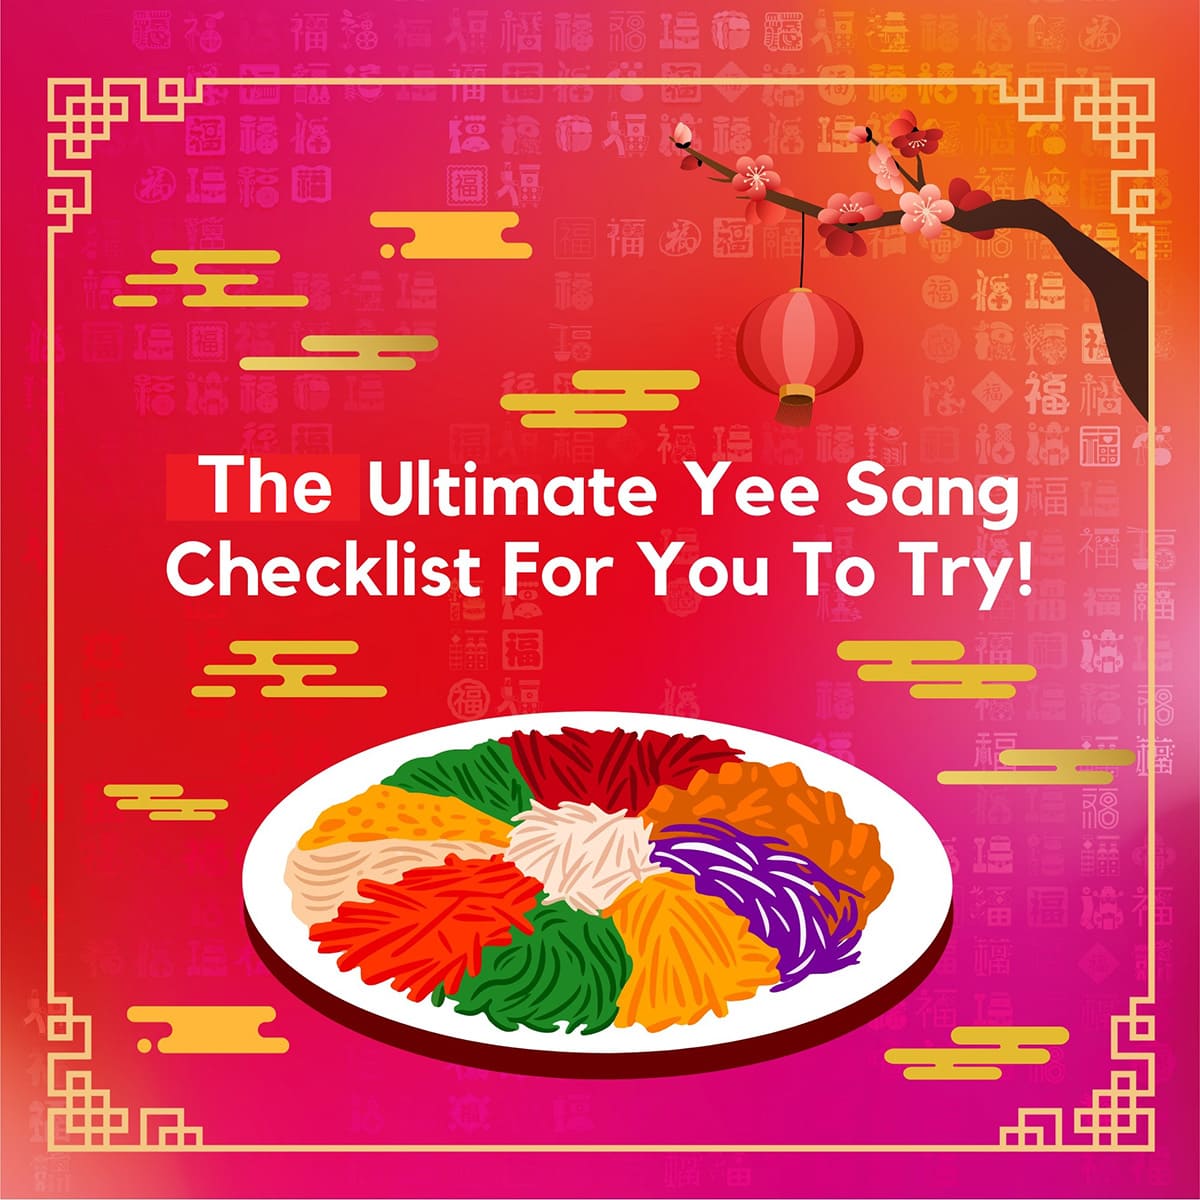 A Wonder-Fu Chinese New Year 2022 at Sunway City Kuala Lumpur! The ultimate yee sang checklist for you to try!